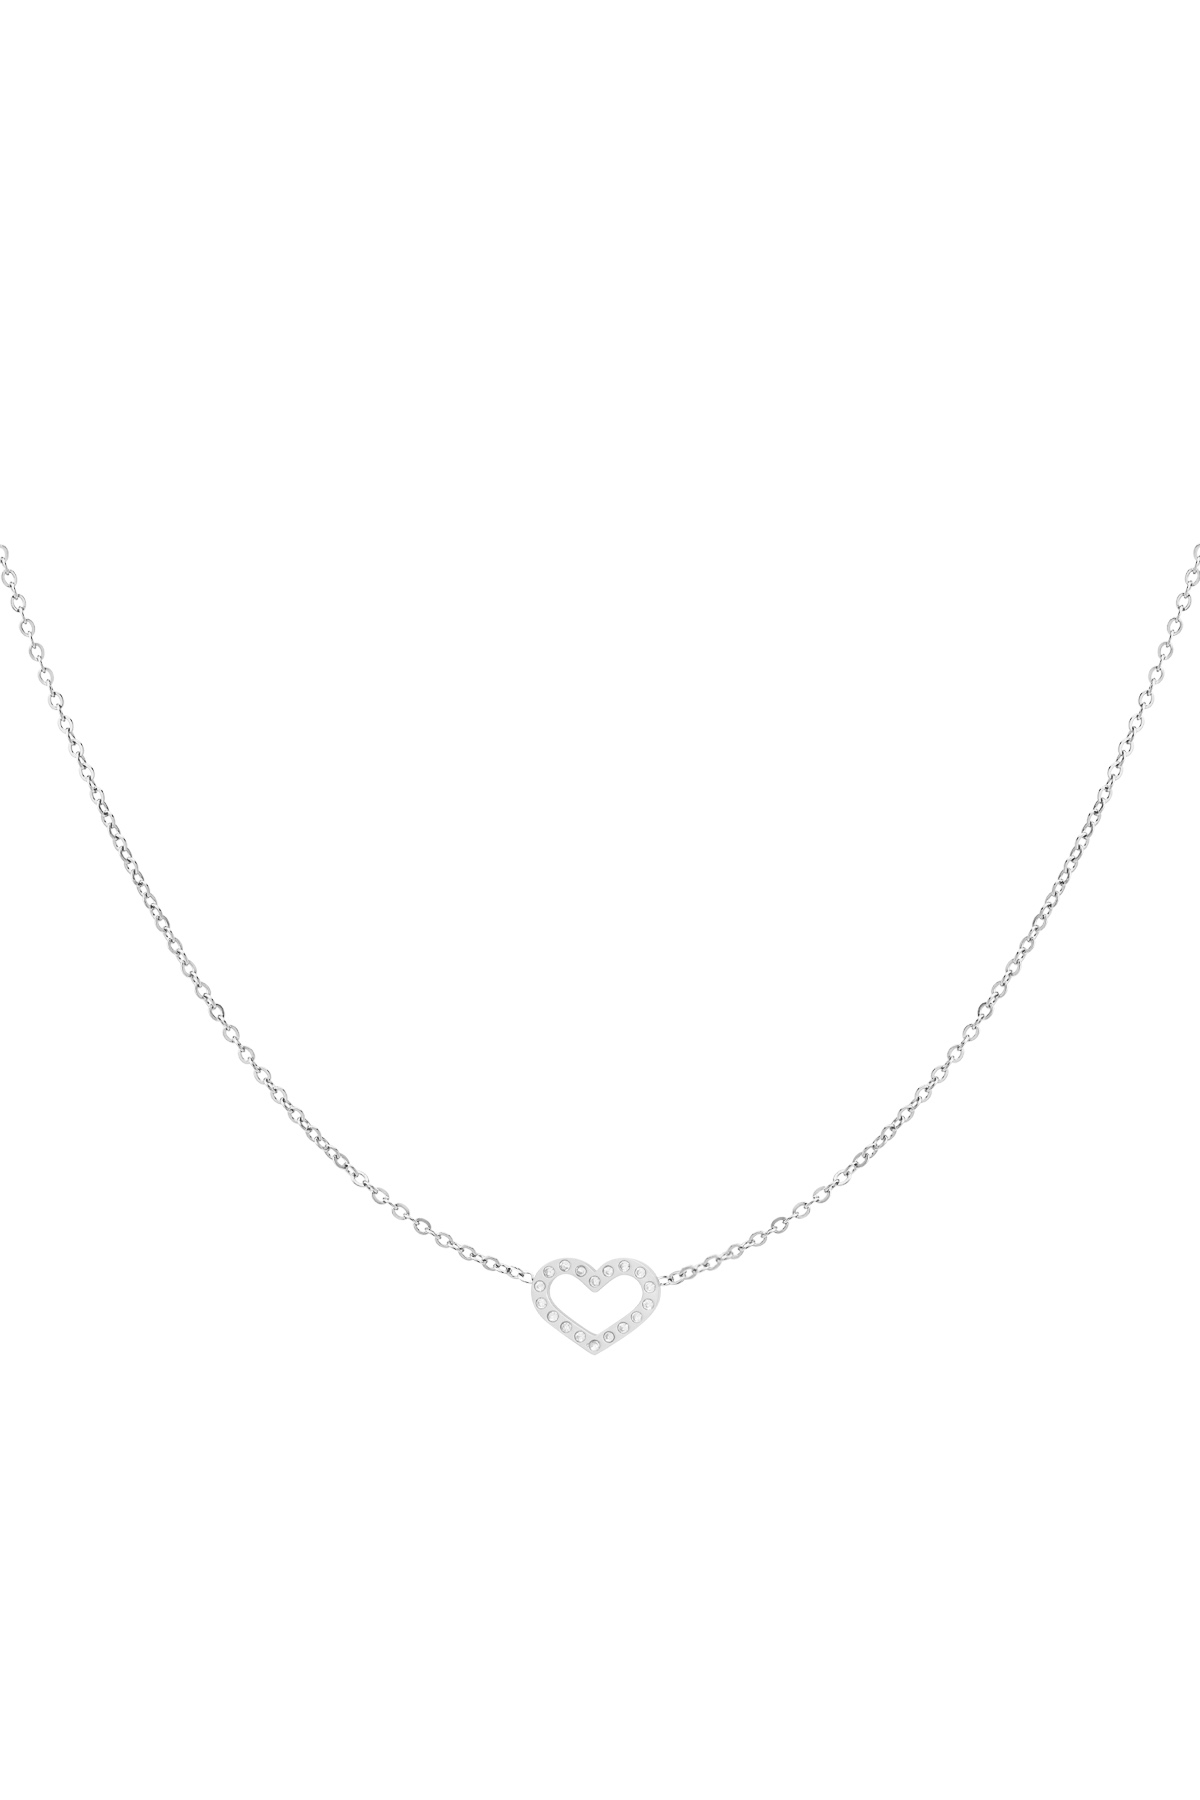 Necklace forever bond - silver h5 Picture4